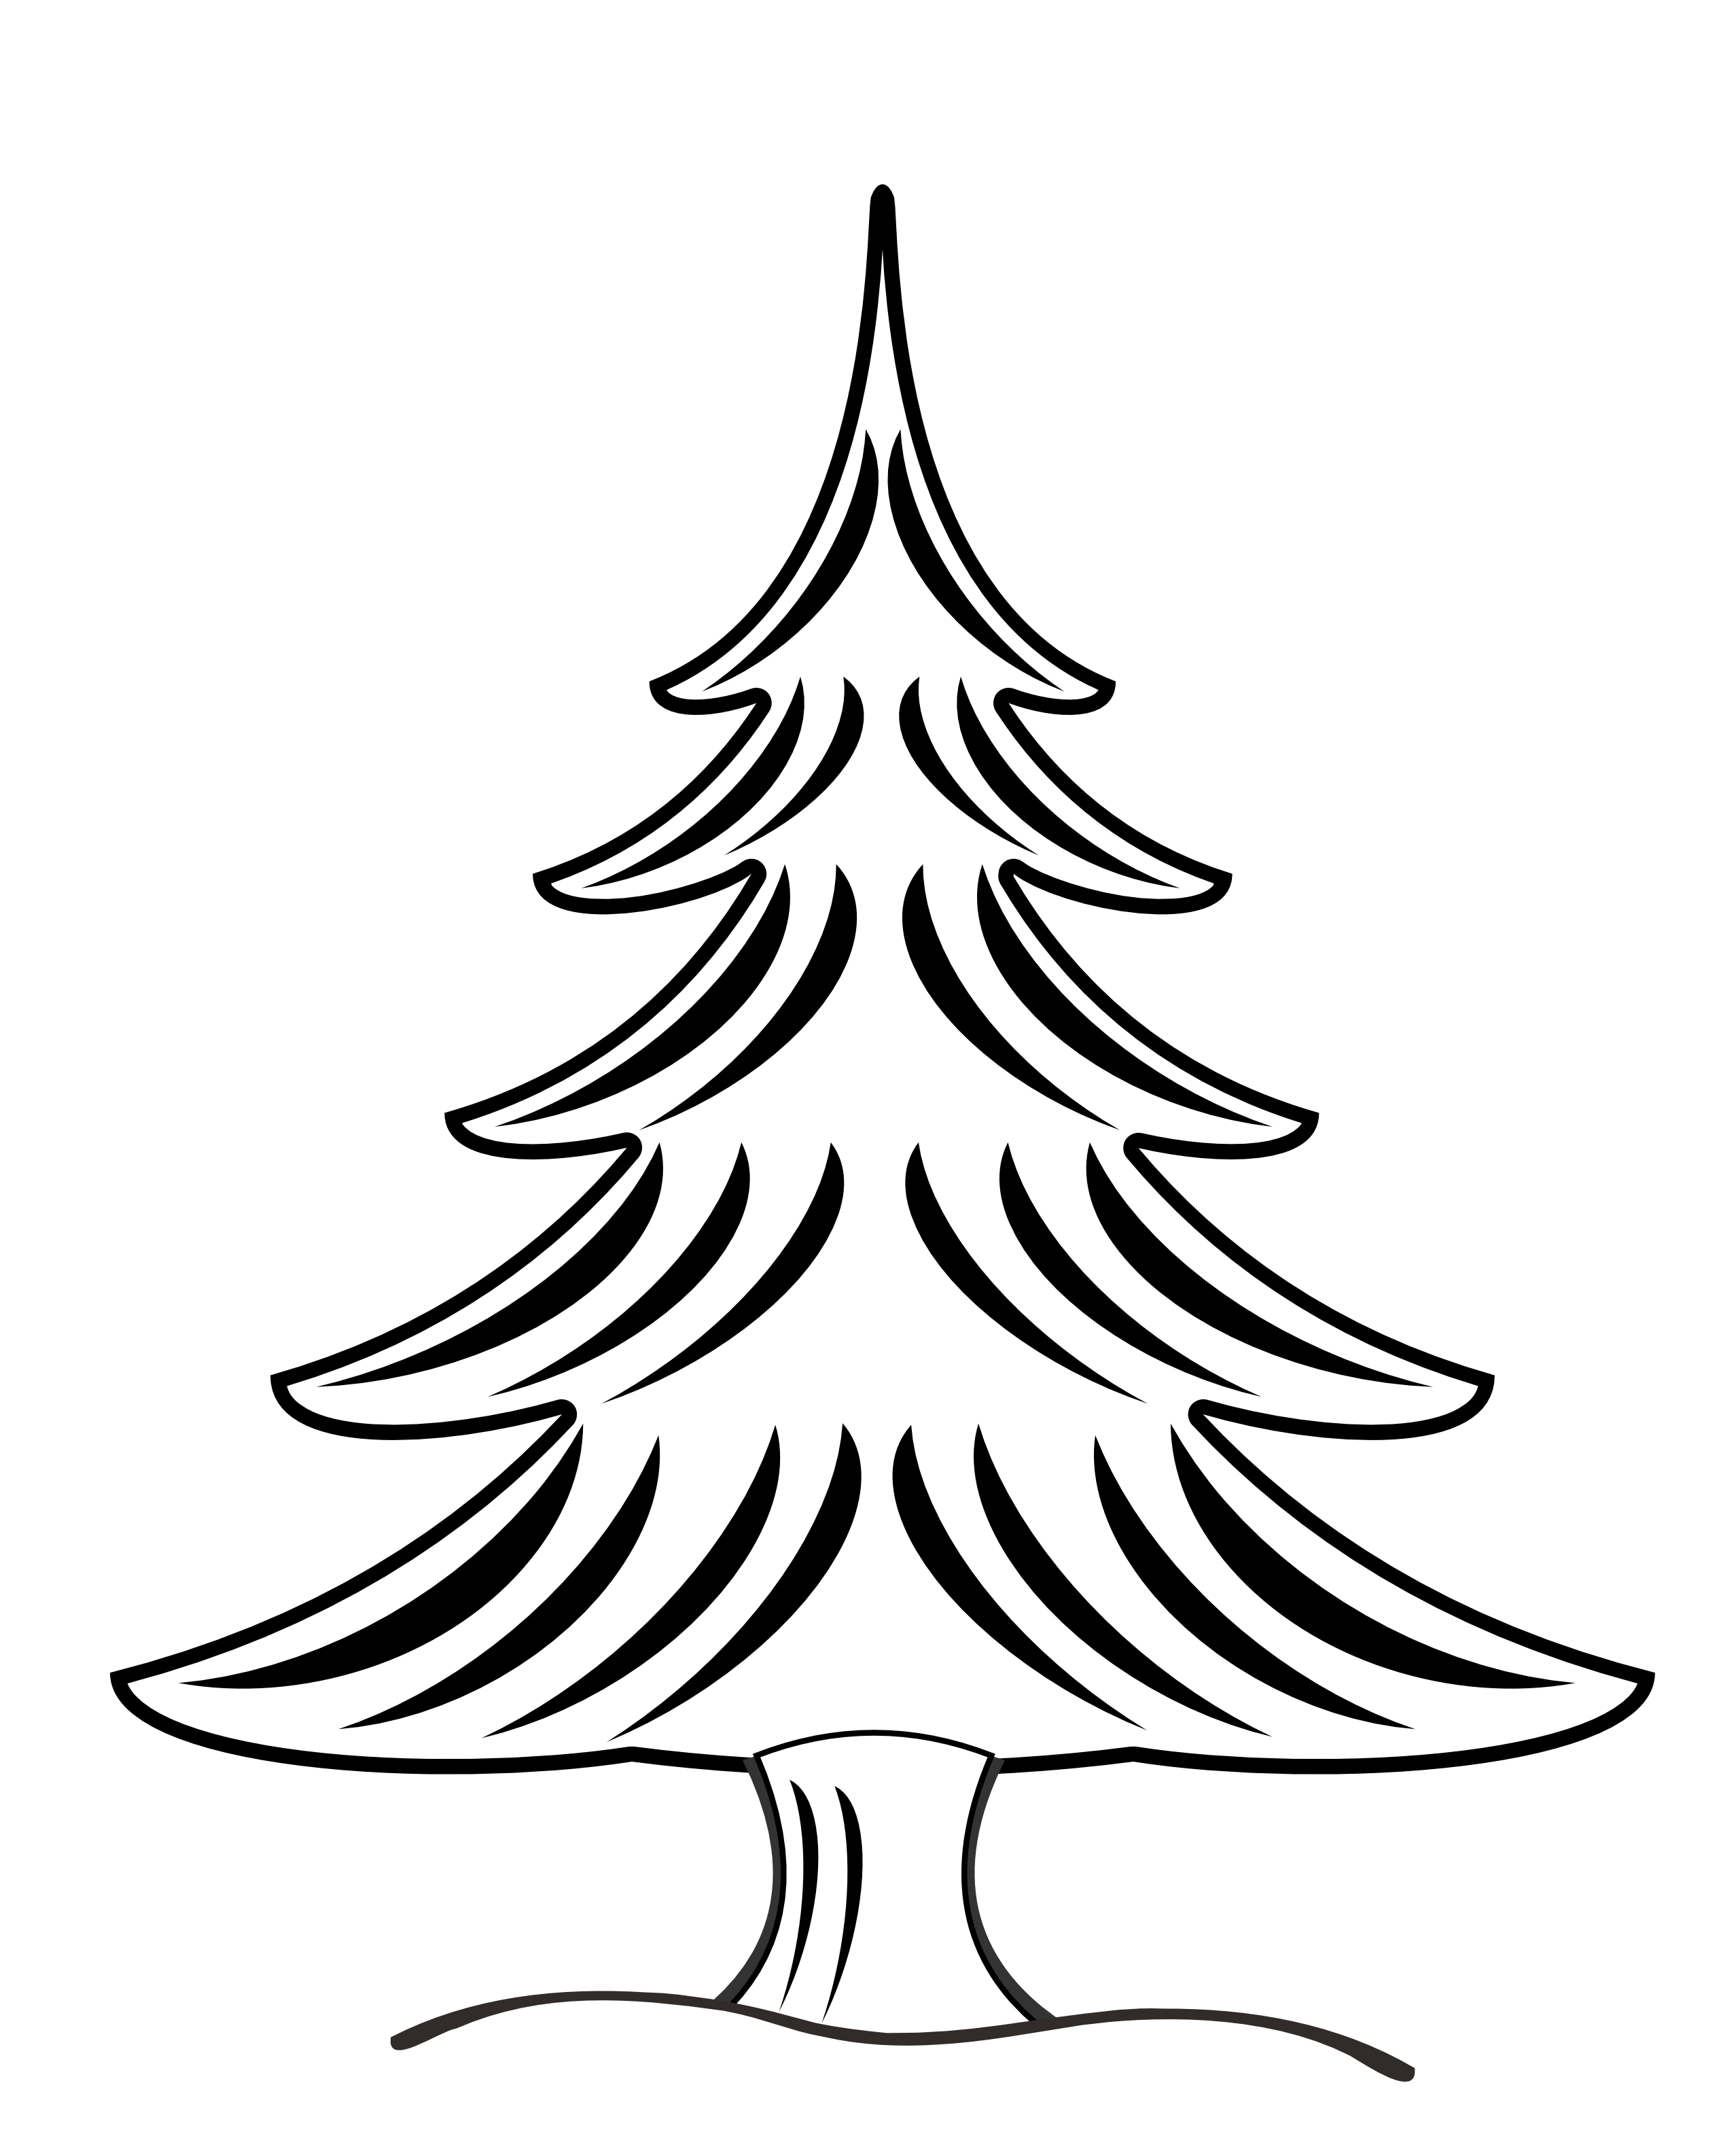 Clipart Christmas Tree Black White | Clipart library - Free Clipart 